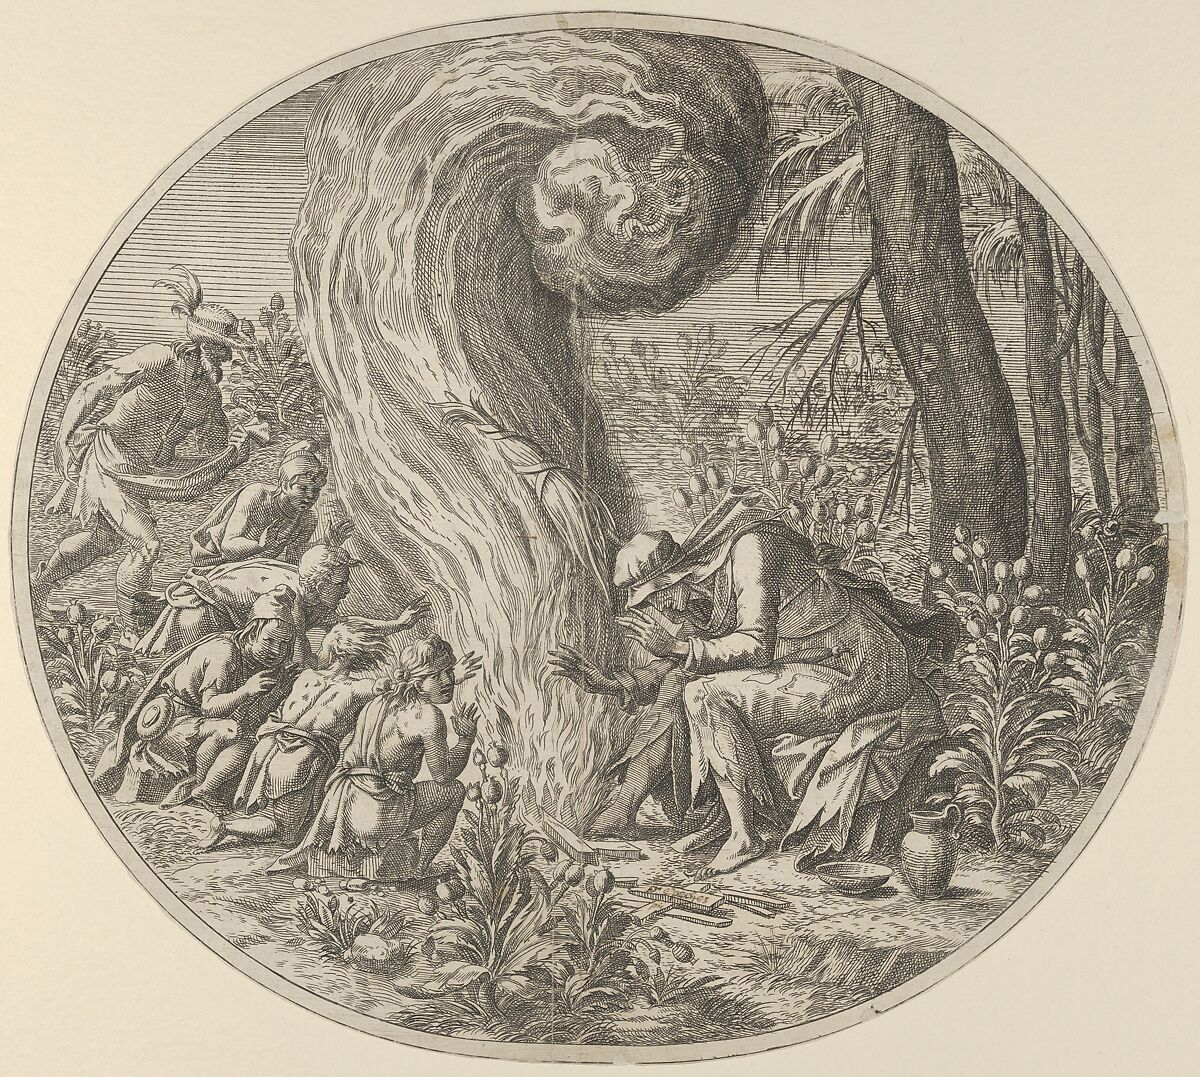 Sloth, from the "Seven Deadly Sins", Léon Davent (French, active 1540–56), Etching 